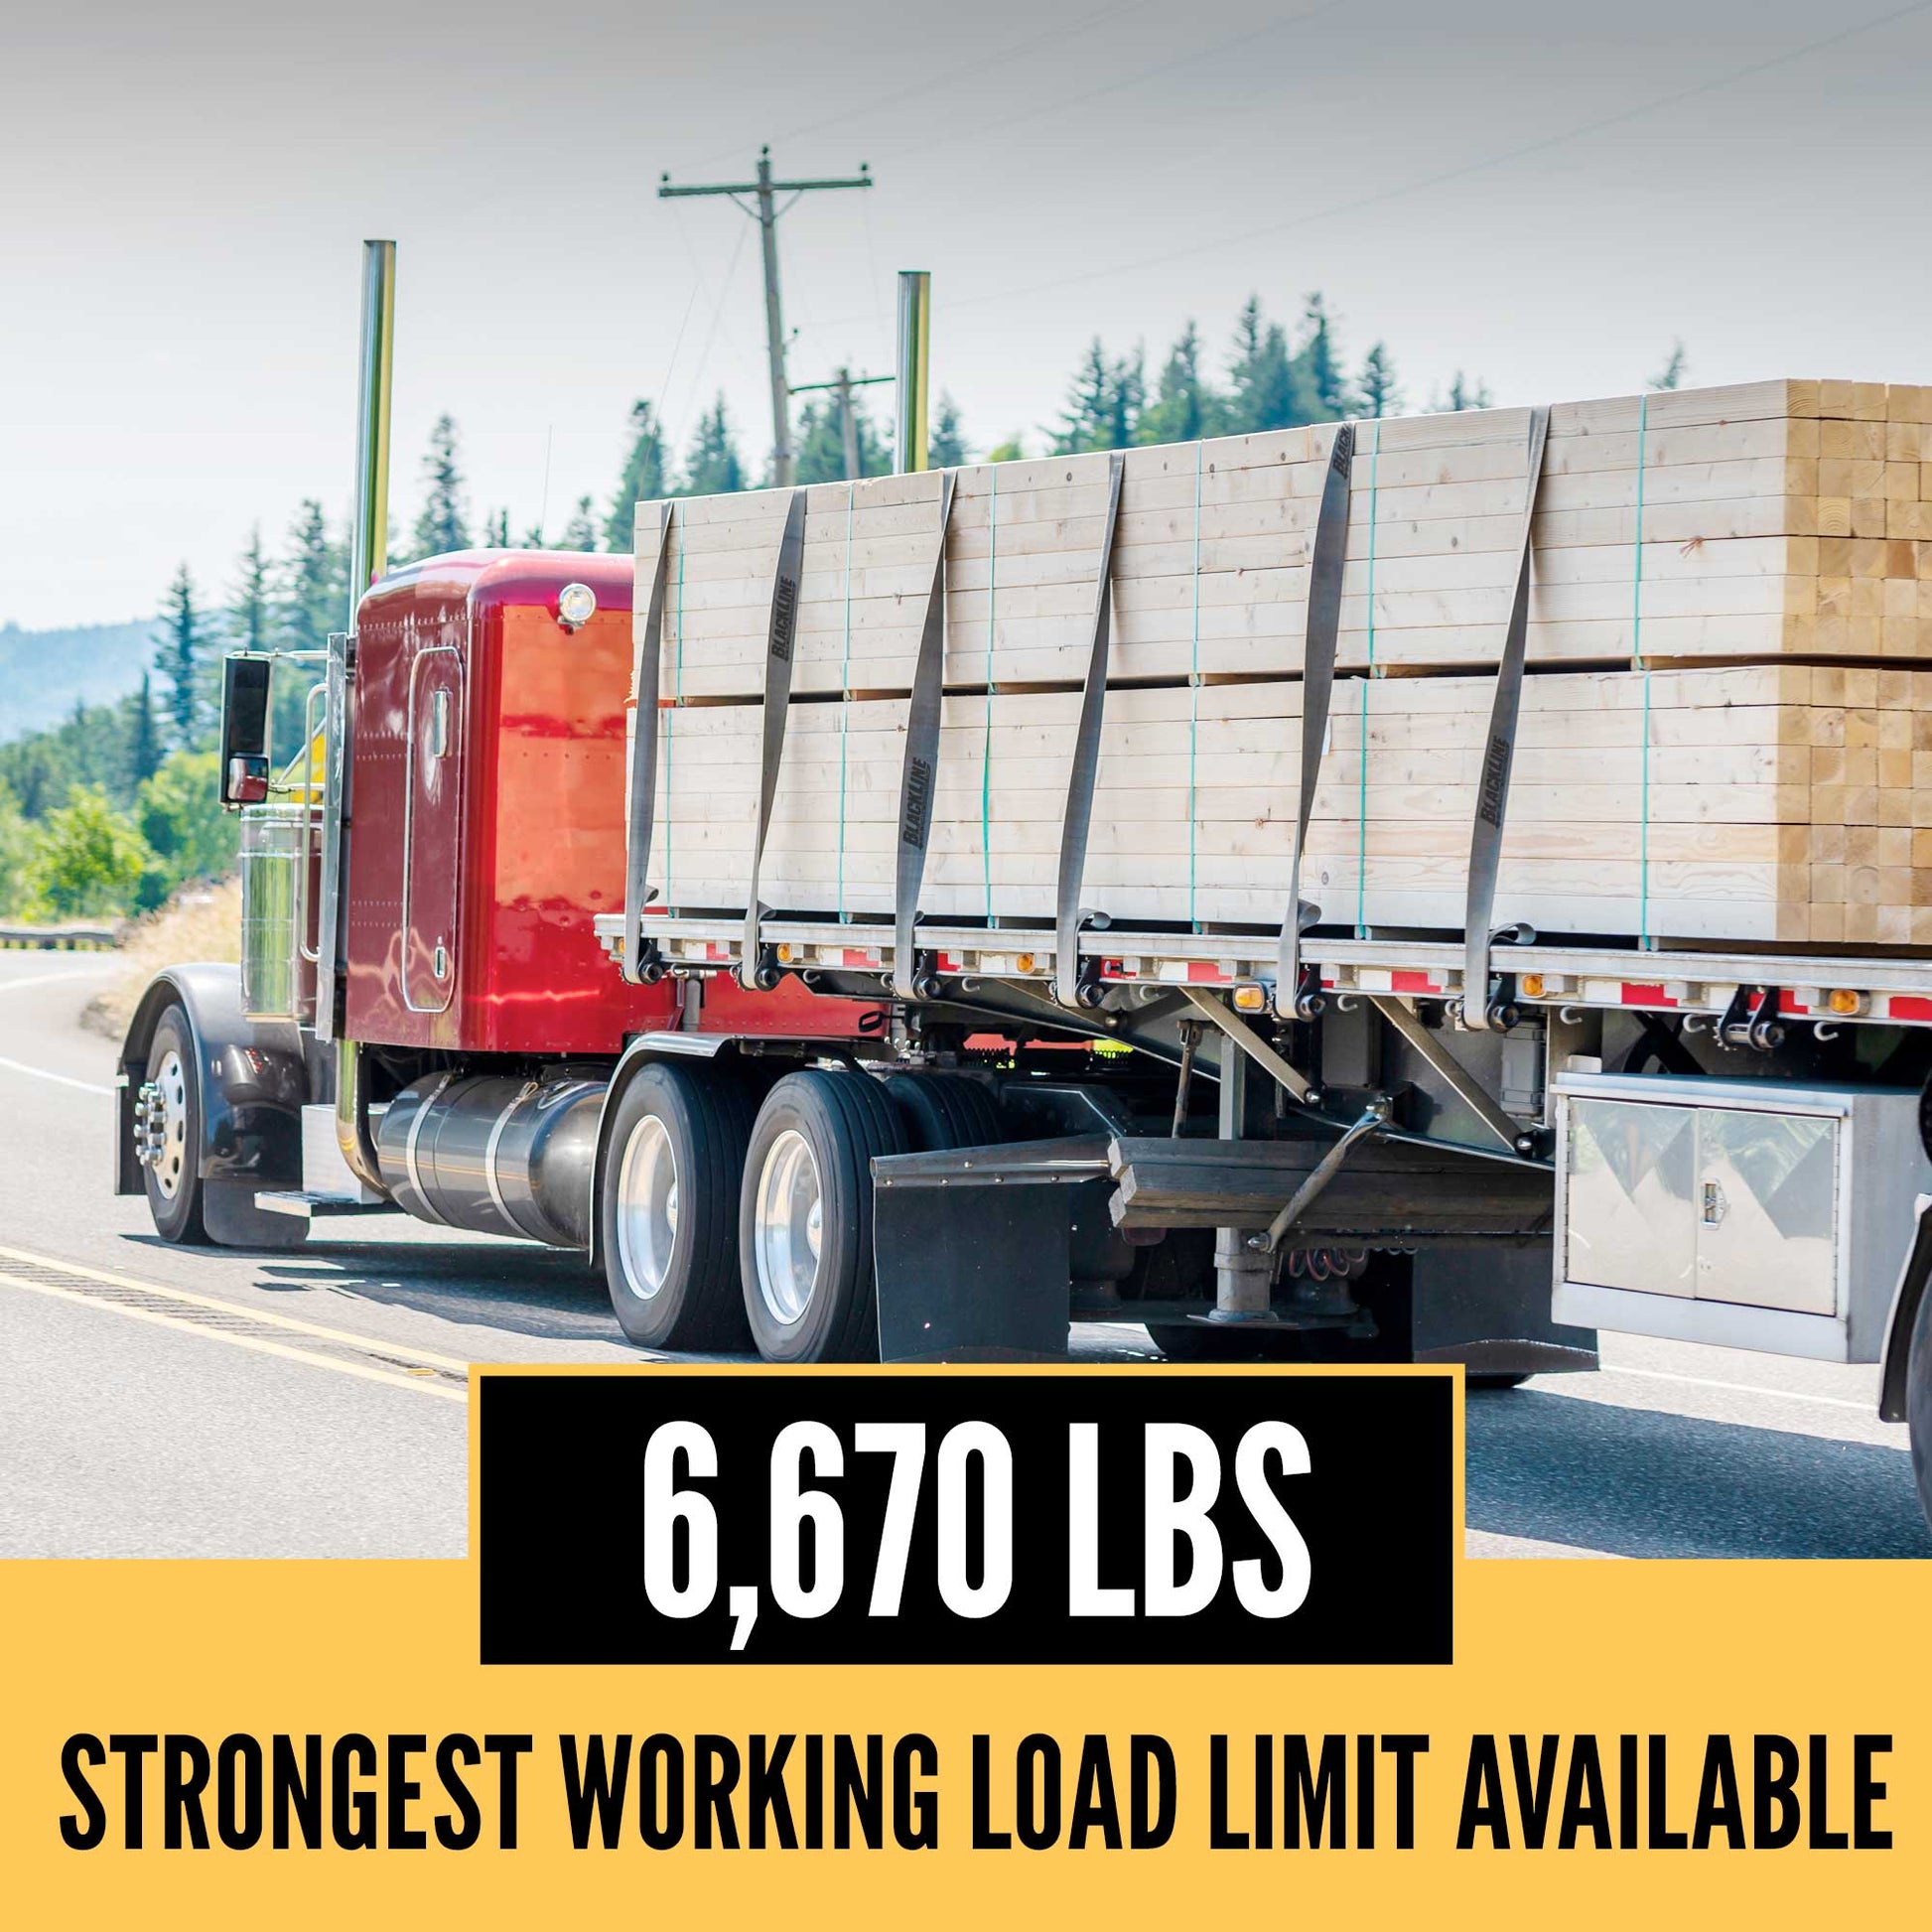 37' BlackLine strongest WLL in the industry at 6,670 lbs